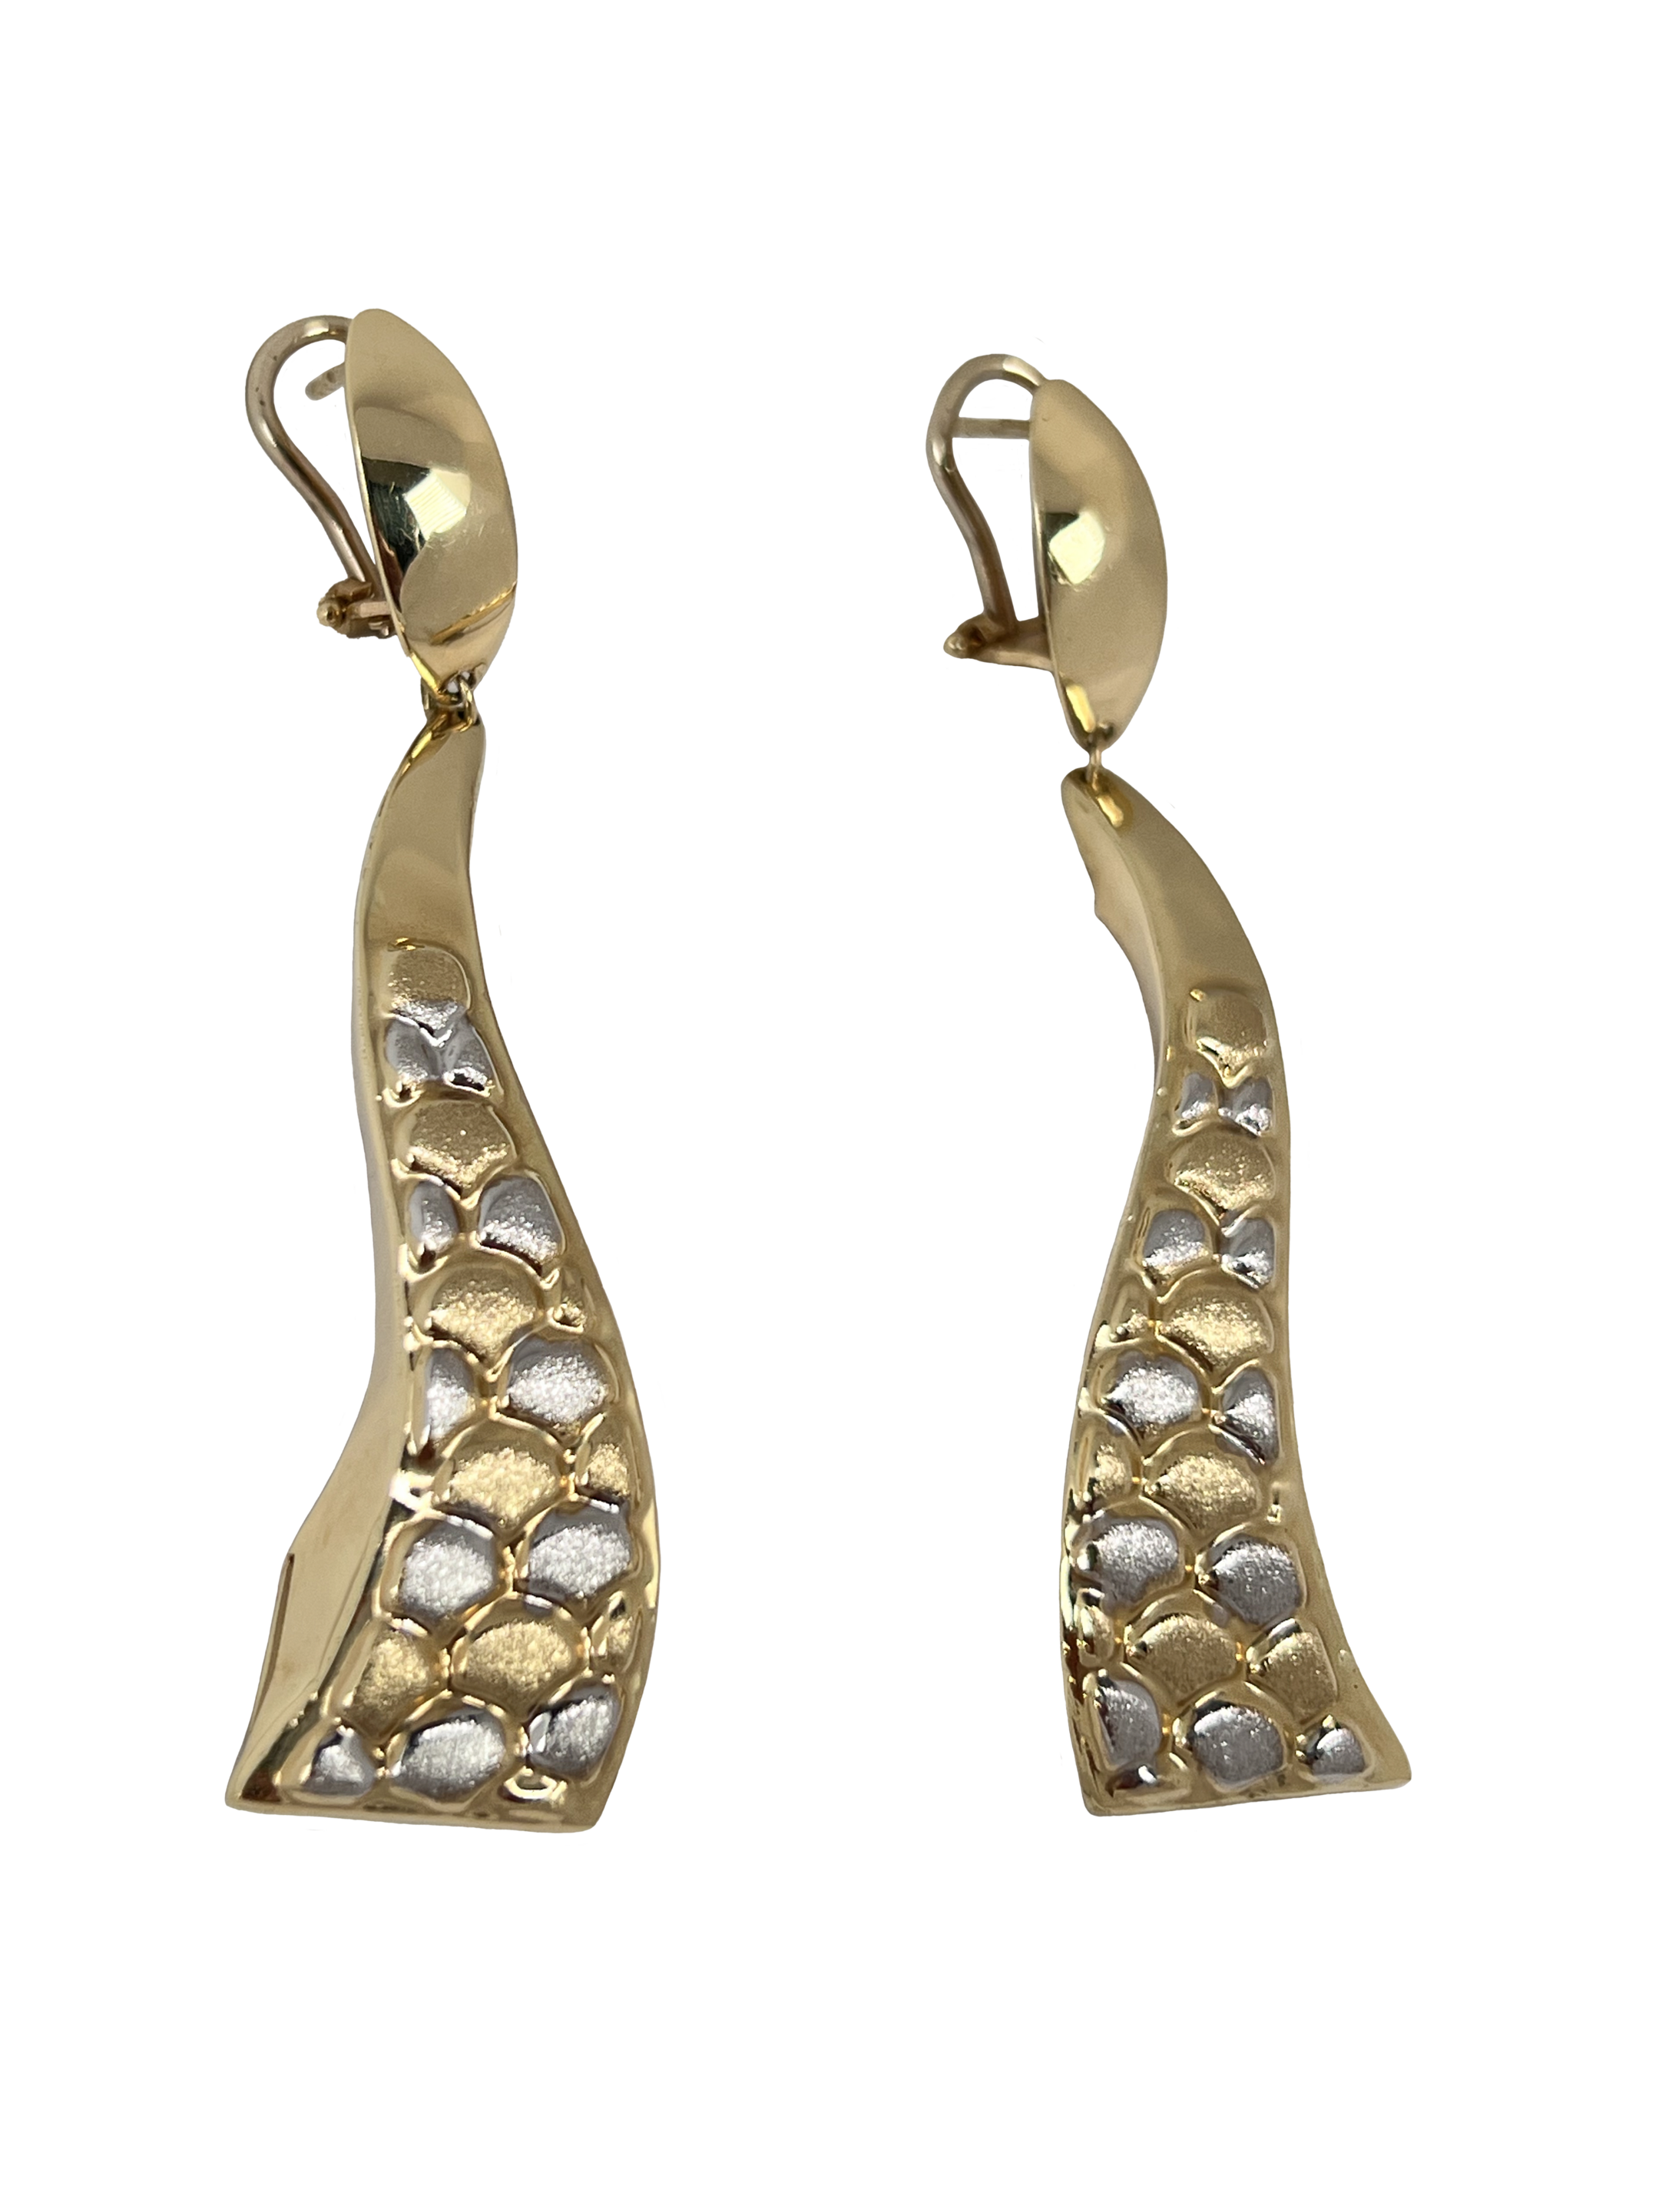 Gold combined earrings with patterns and sandblasting